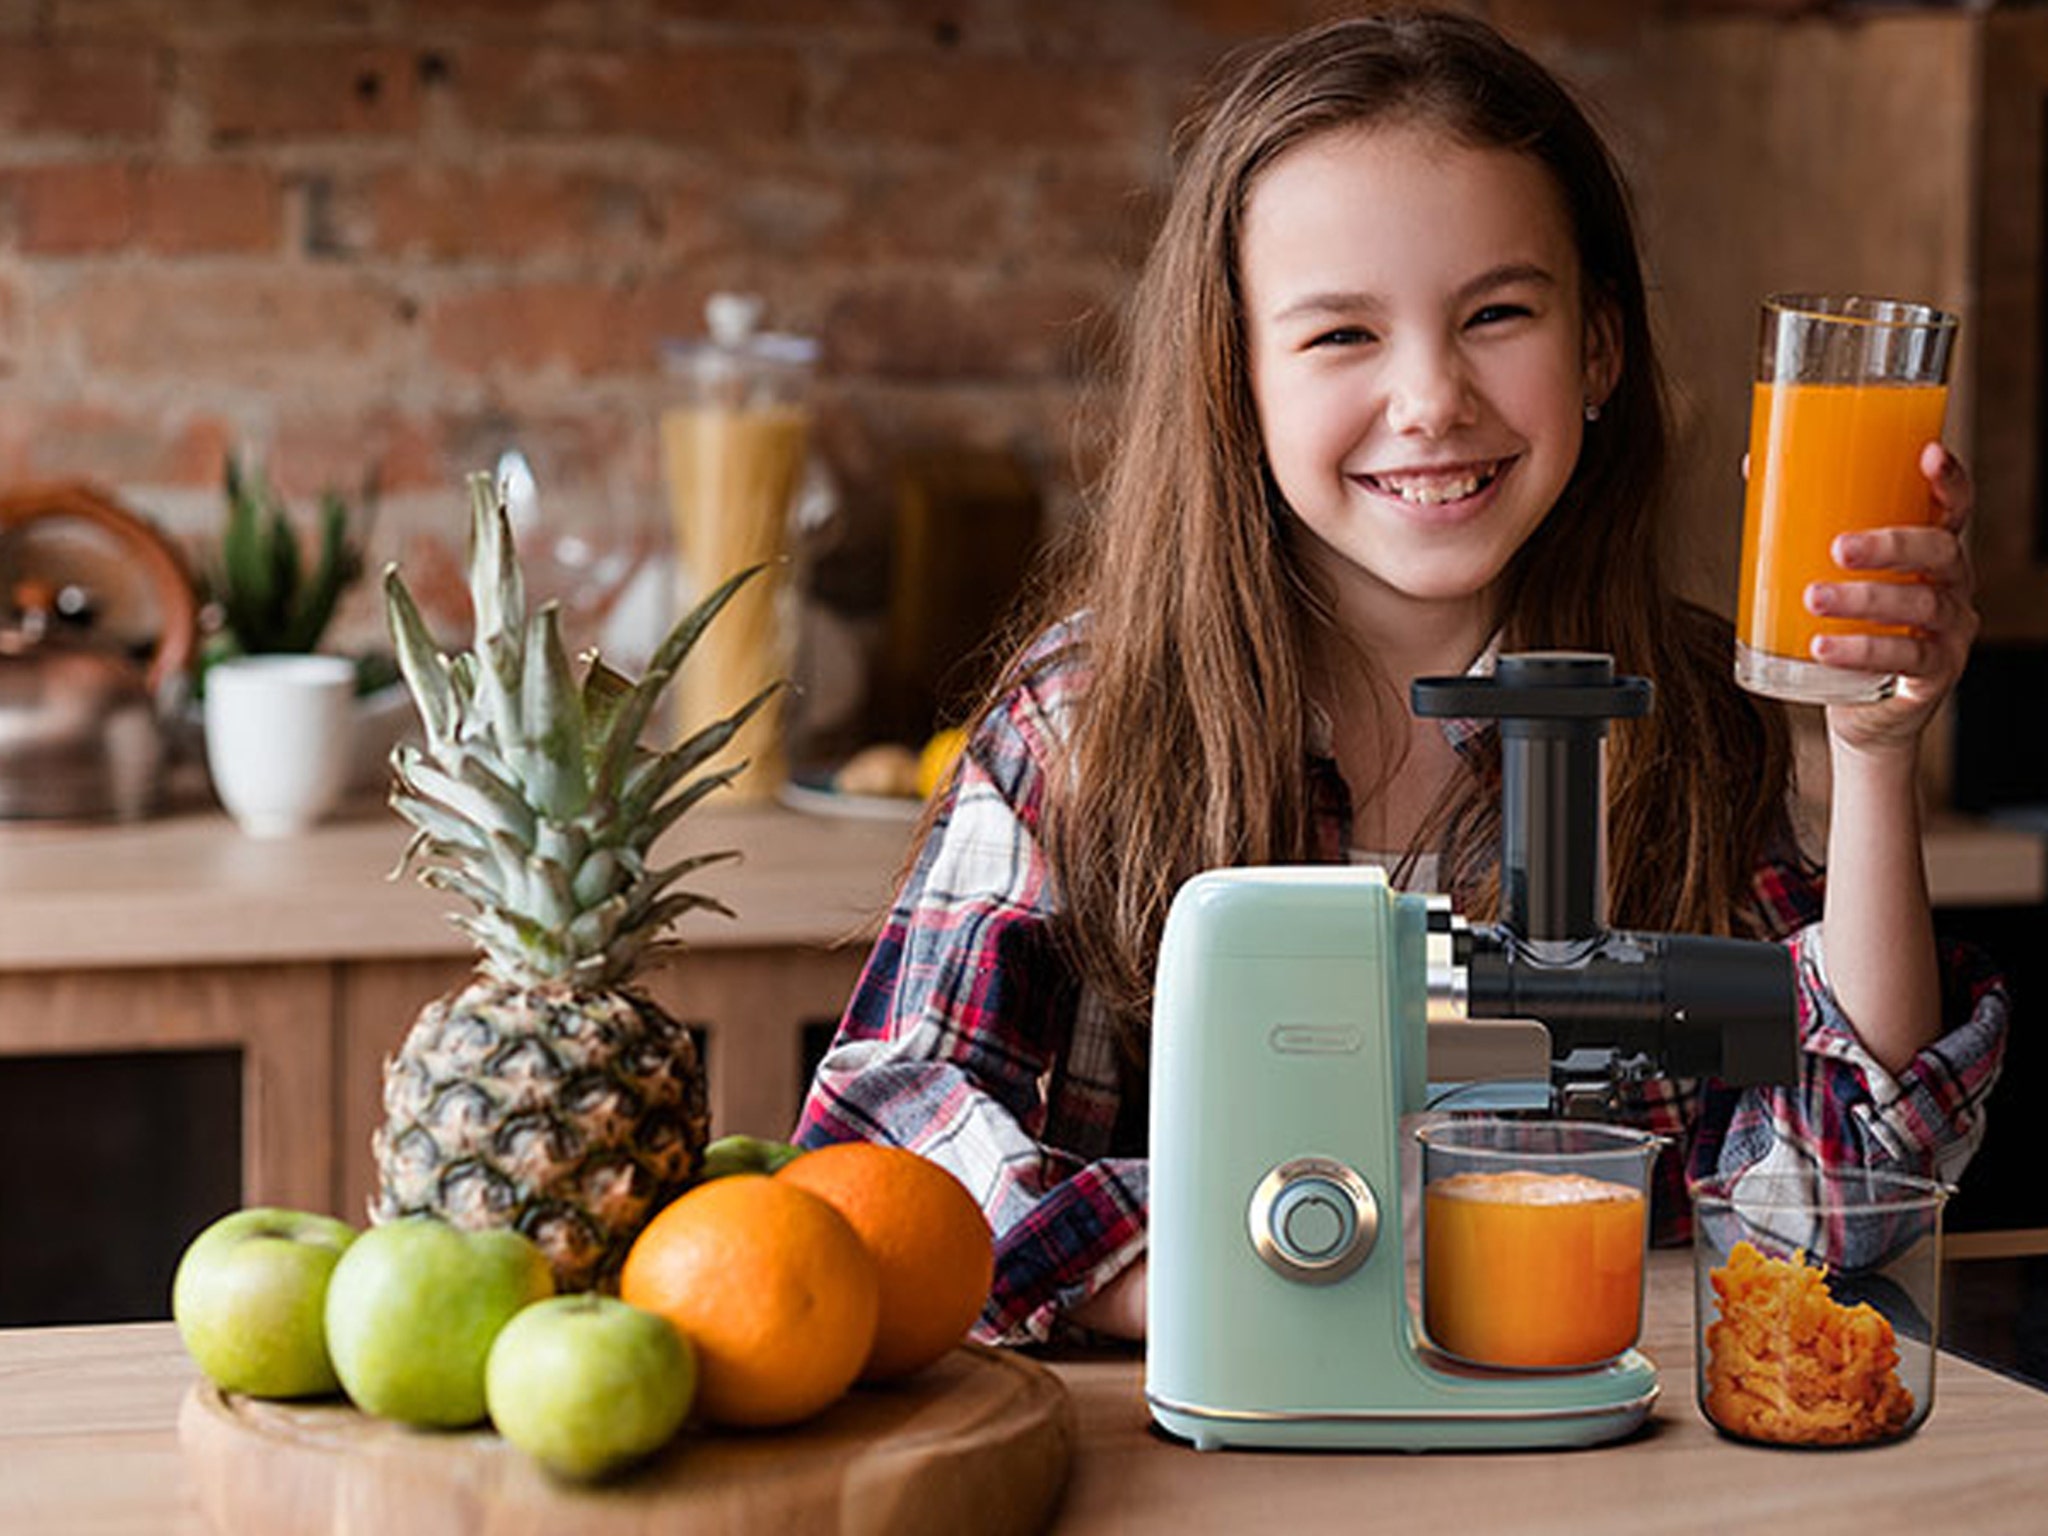 This Kitchen Bundle Includes A Kettle, Toaster & Slow Juicer!